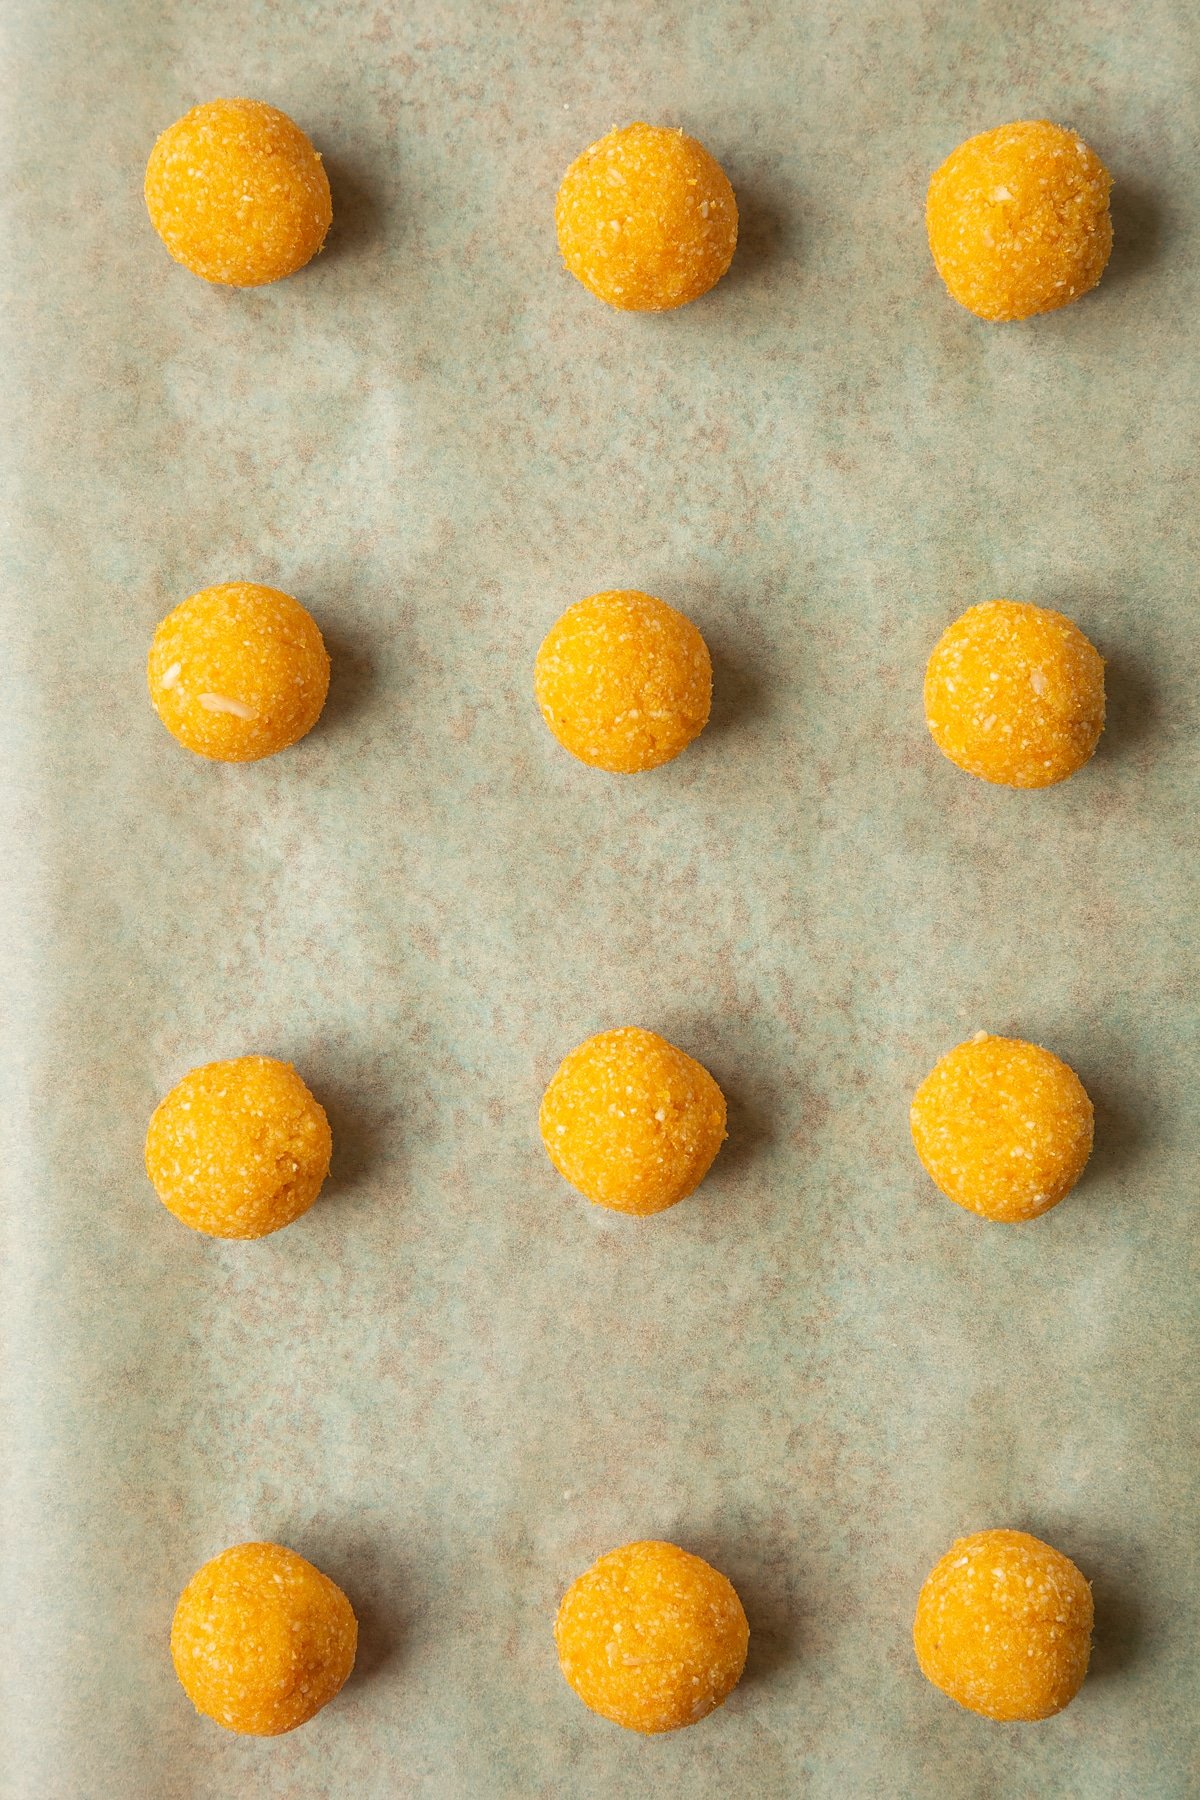 12 balls made from blended, apricots and nuts. 